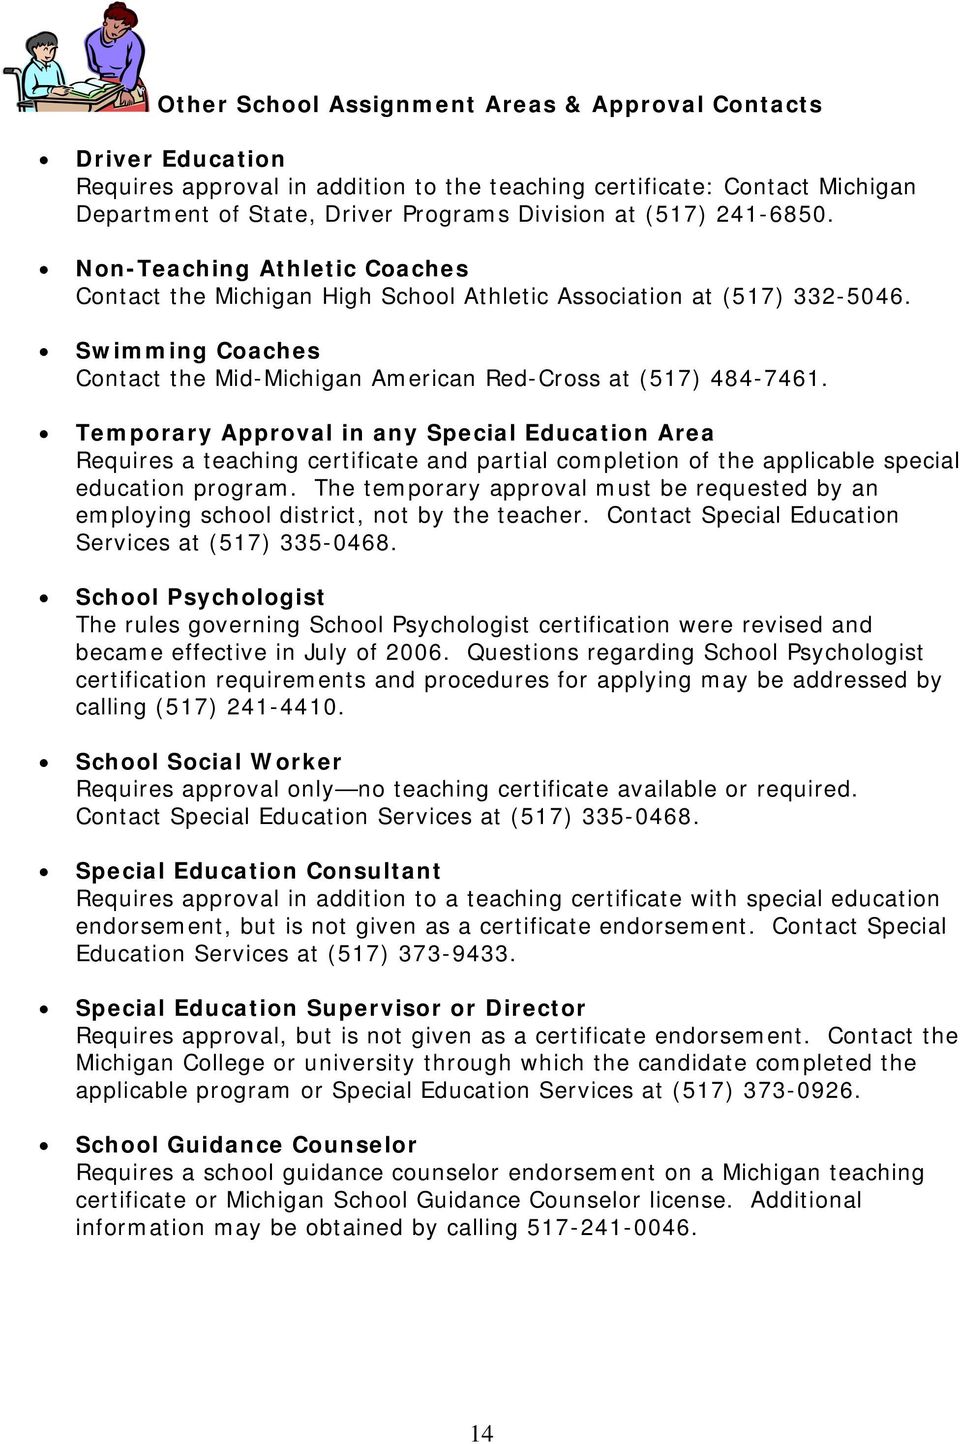 Temporary Approval in any Special Education Area Requires a teaching certificate and partial completion of the applicable special education program.